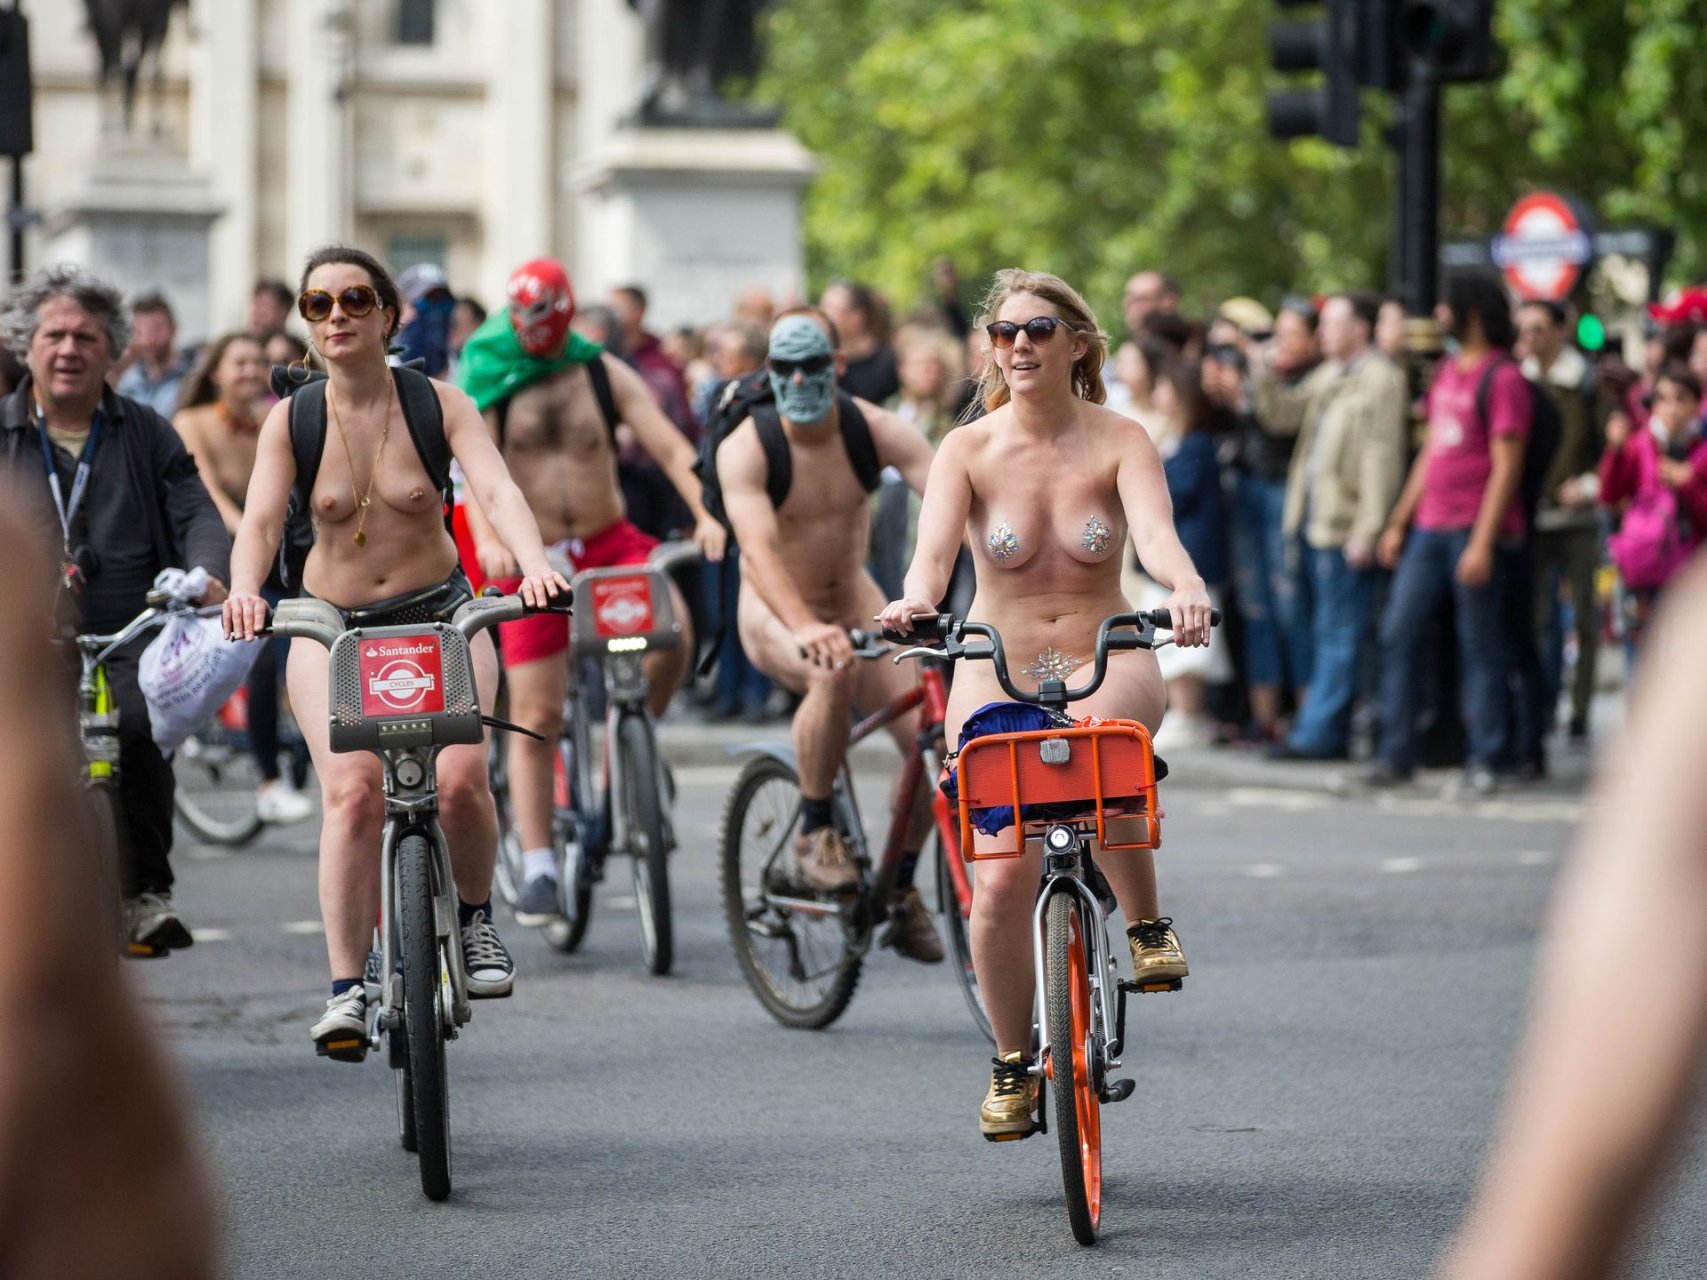 Nude cyclists take part in the 16th annual naked bike ride by riding bicycl...